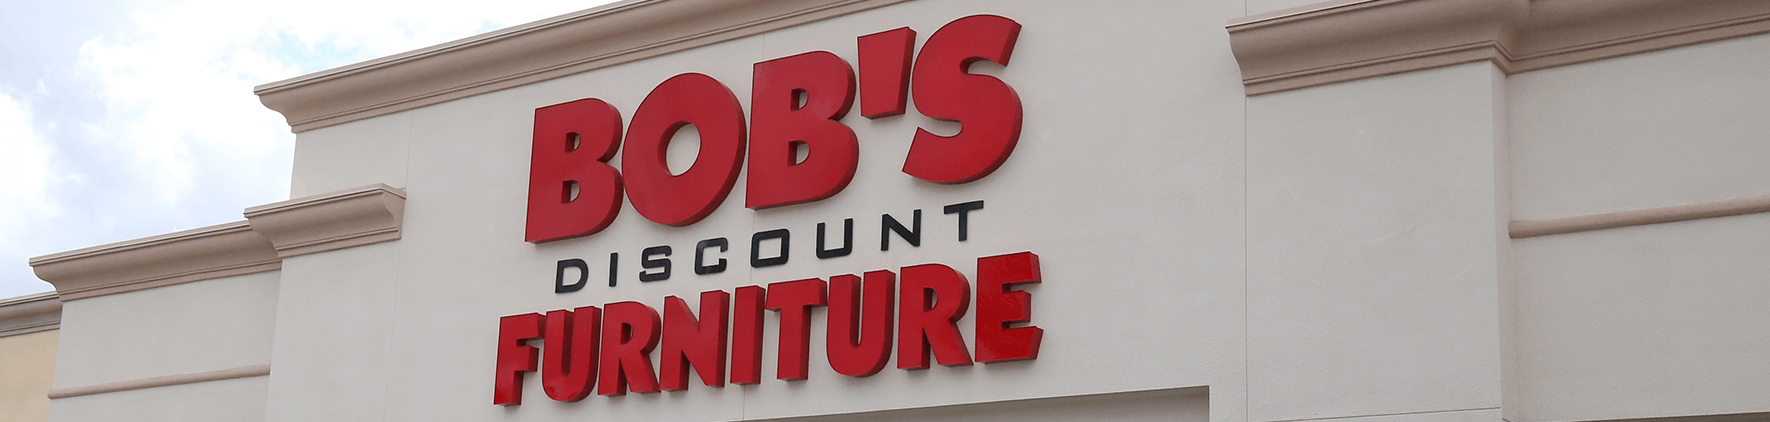 Bobs Furniture Hours : Why Bob S Discount Furniture Set Its Own